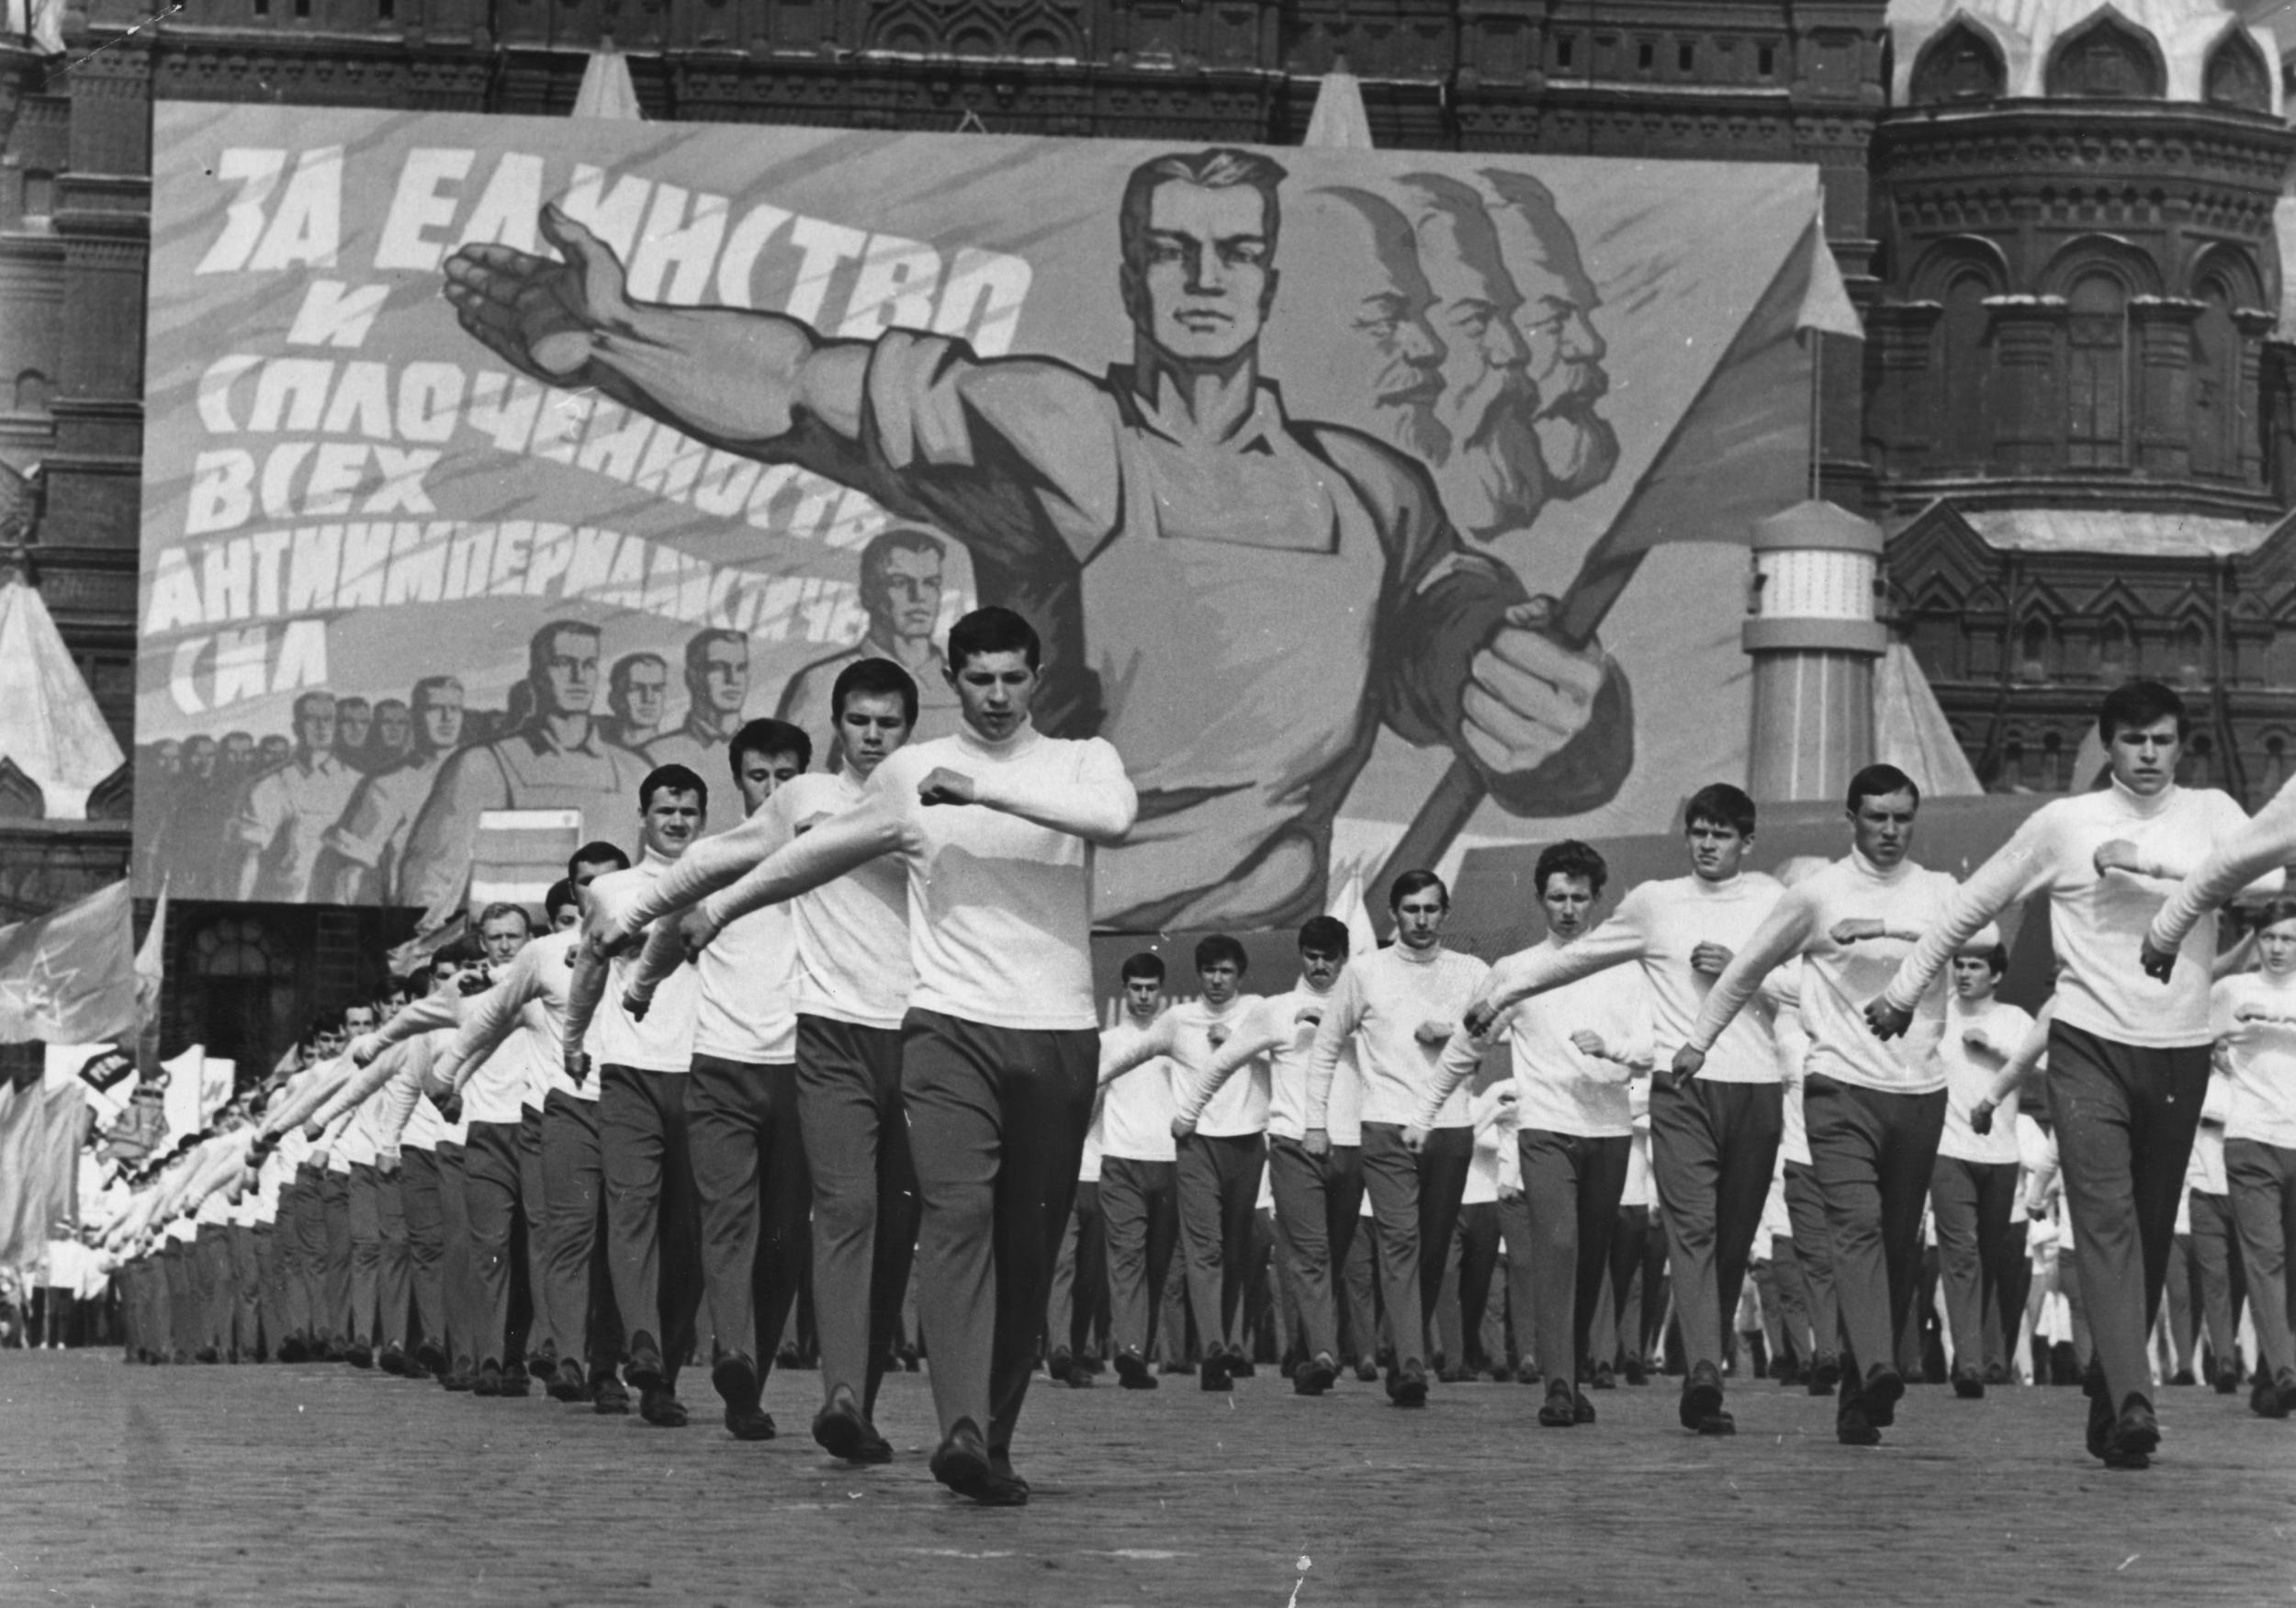 A Mayday parade in Red Square, 1969 (Getty)